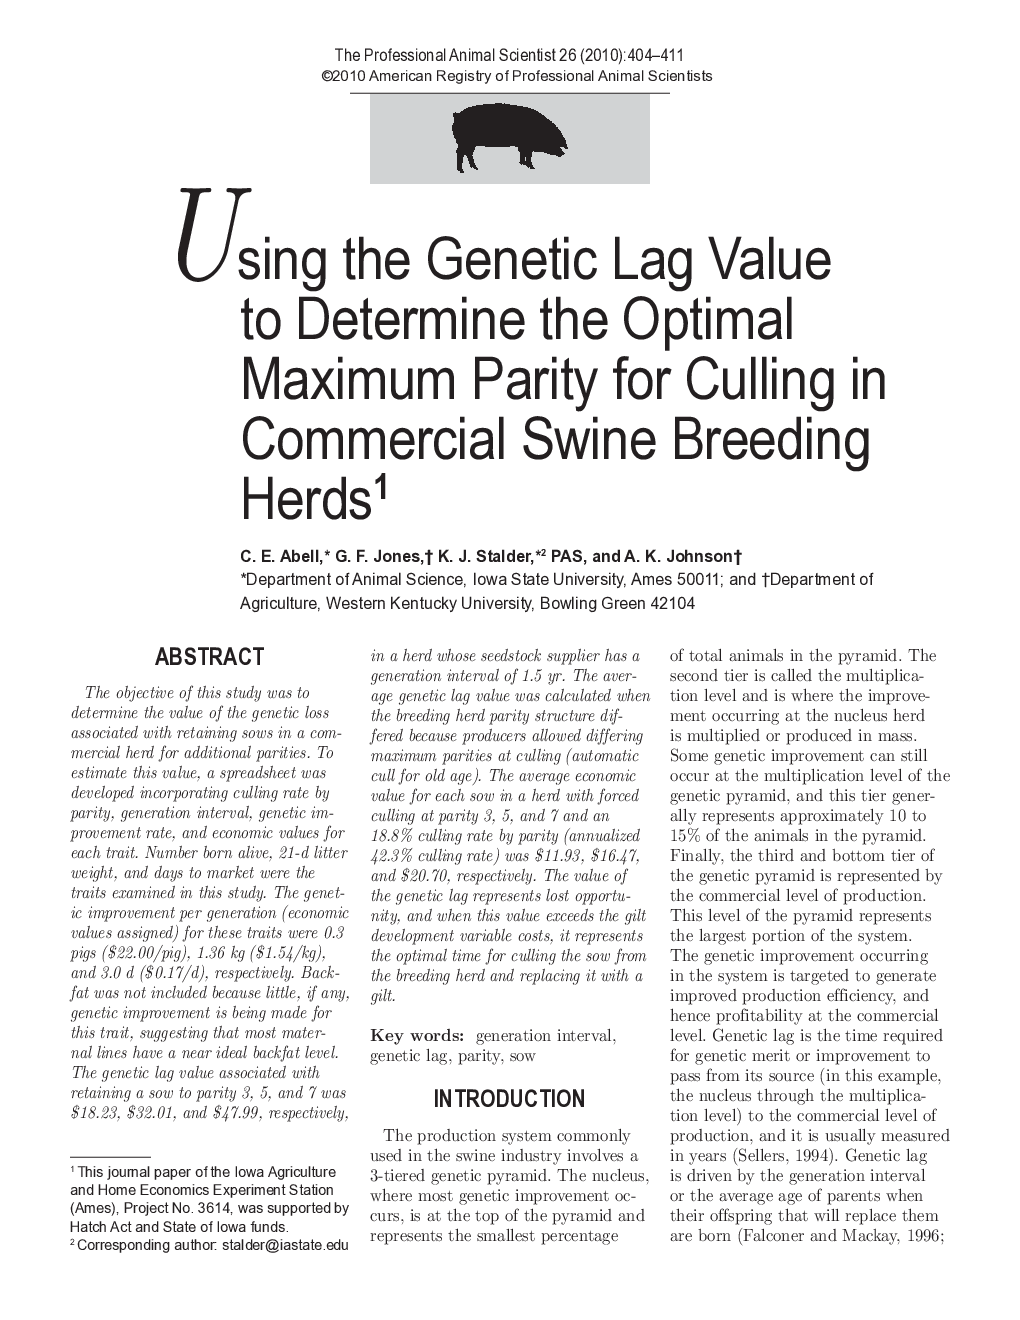 Using the Genetic Lag Value to Determine the Optimal Maximum Parity for Culling in Commercial Swine Breeding Herds1